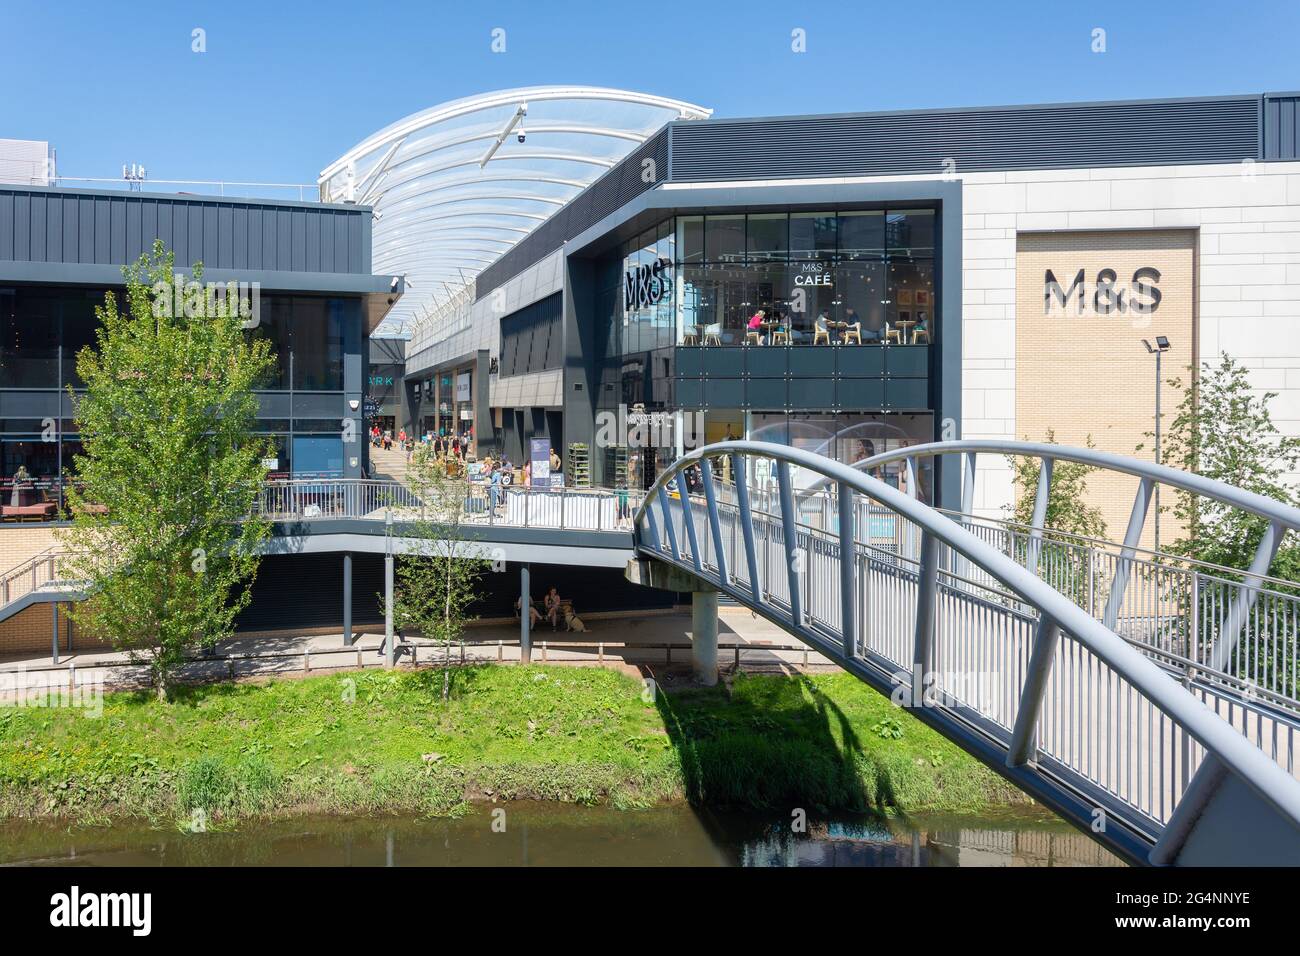 Entrance to Riverside Shopping Centre across River Sow, Stafford, Staffordshire, England, United Kingdom Stock Photo